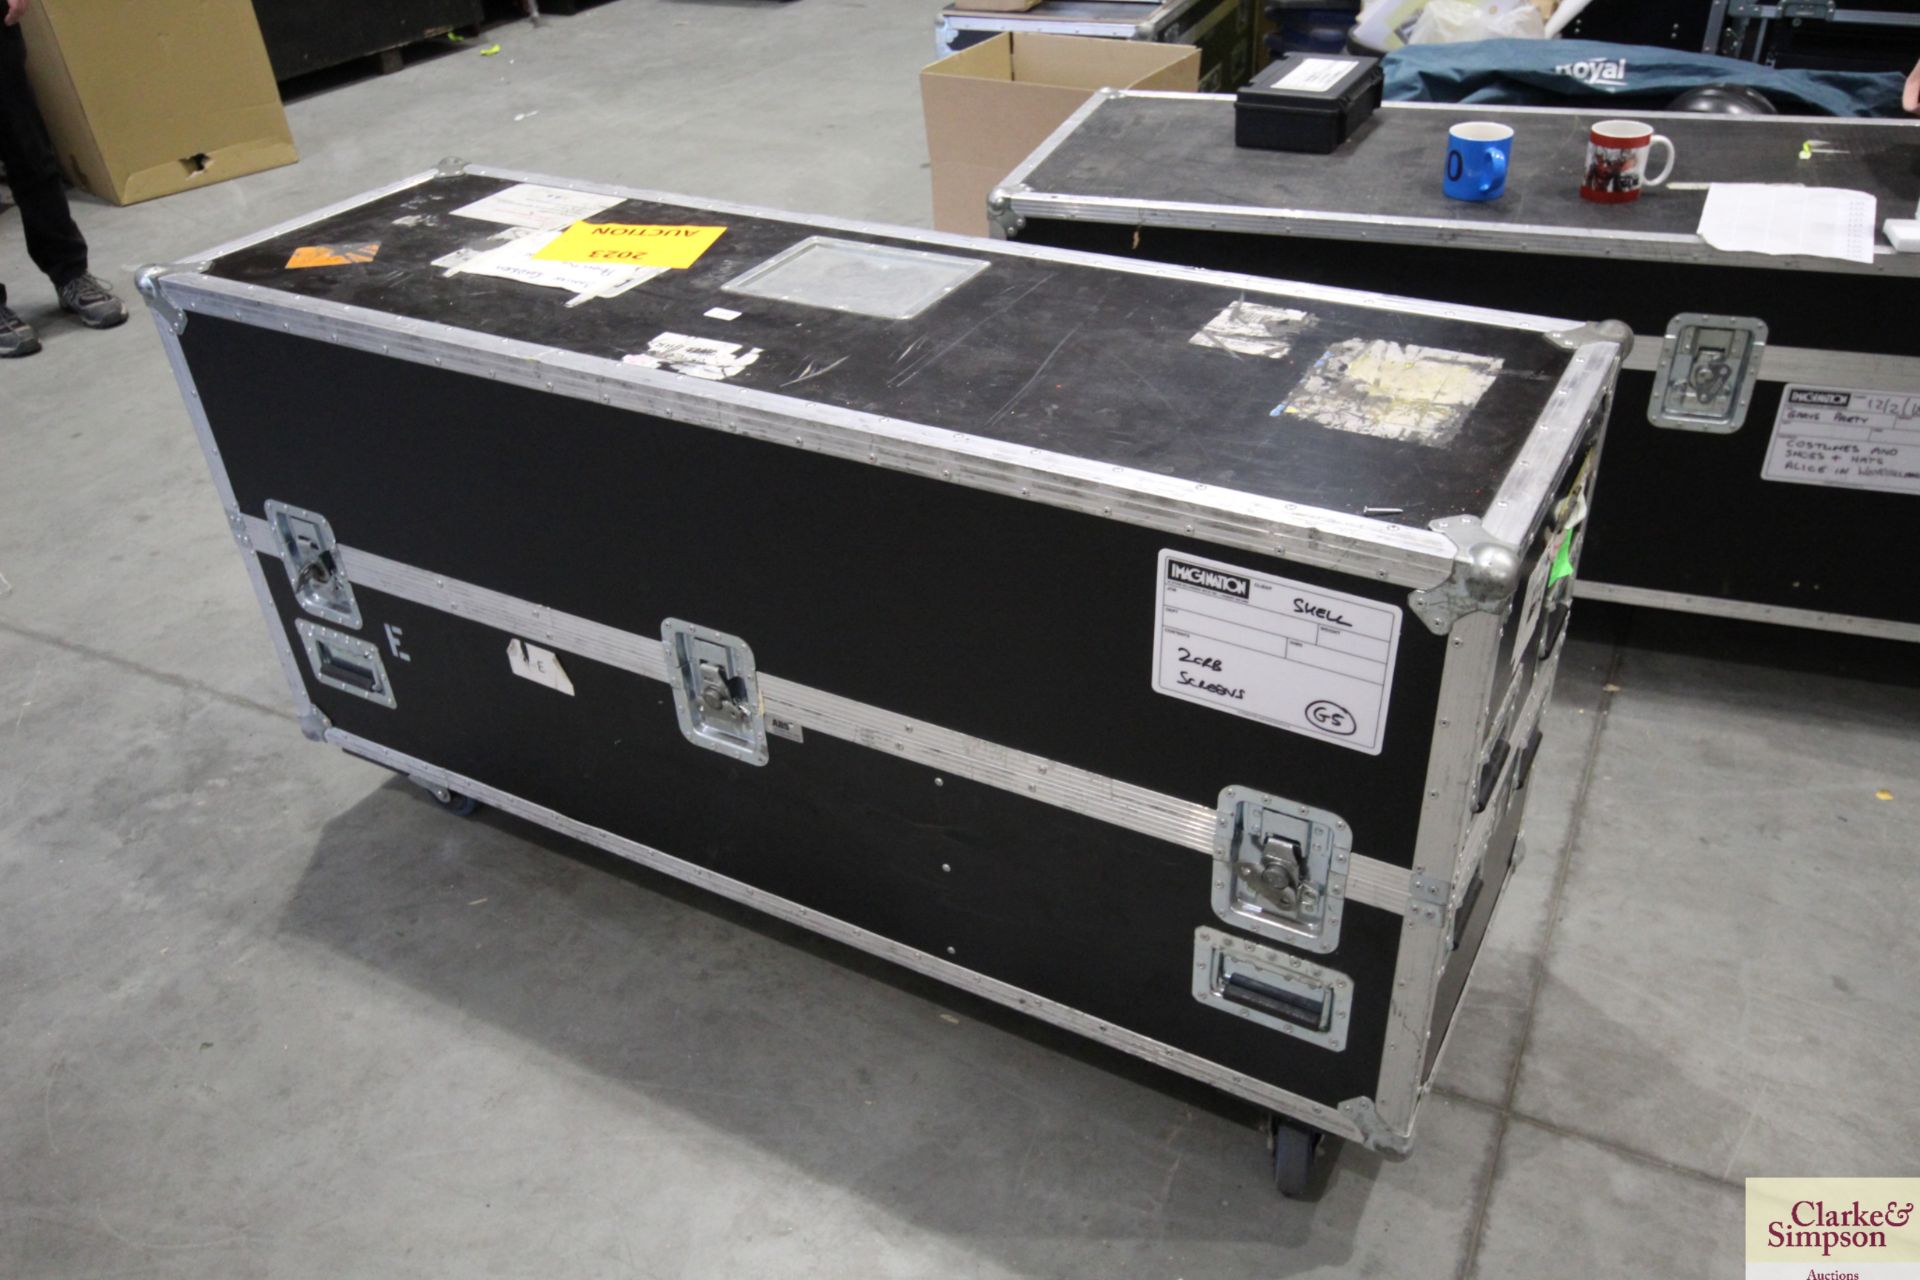 Wheeled flight case measuring approx. 51cm x 161.5cm x 69.5cm, containing two ELO 42" LCD touch